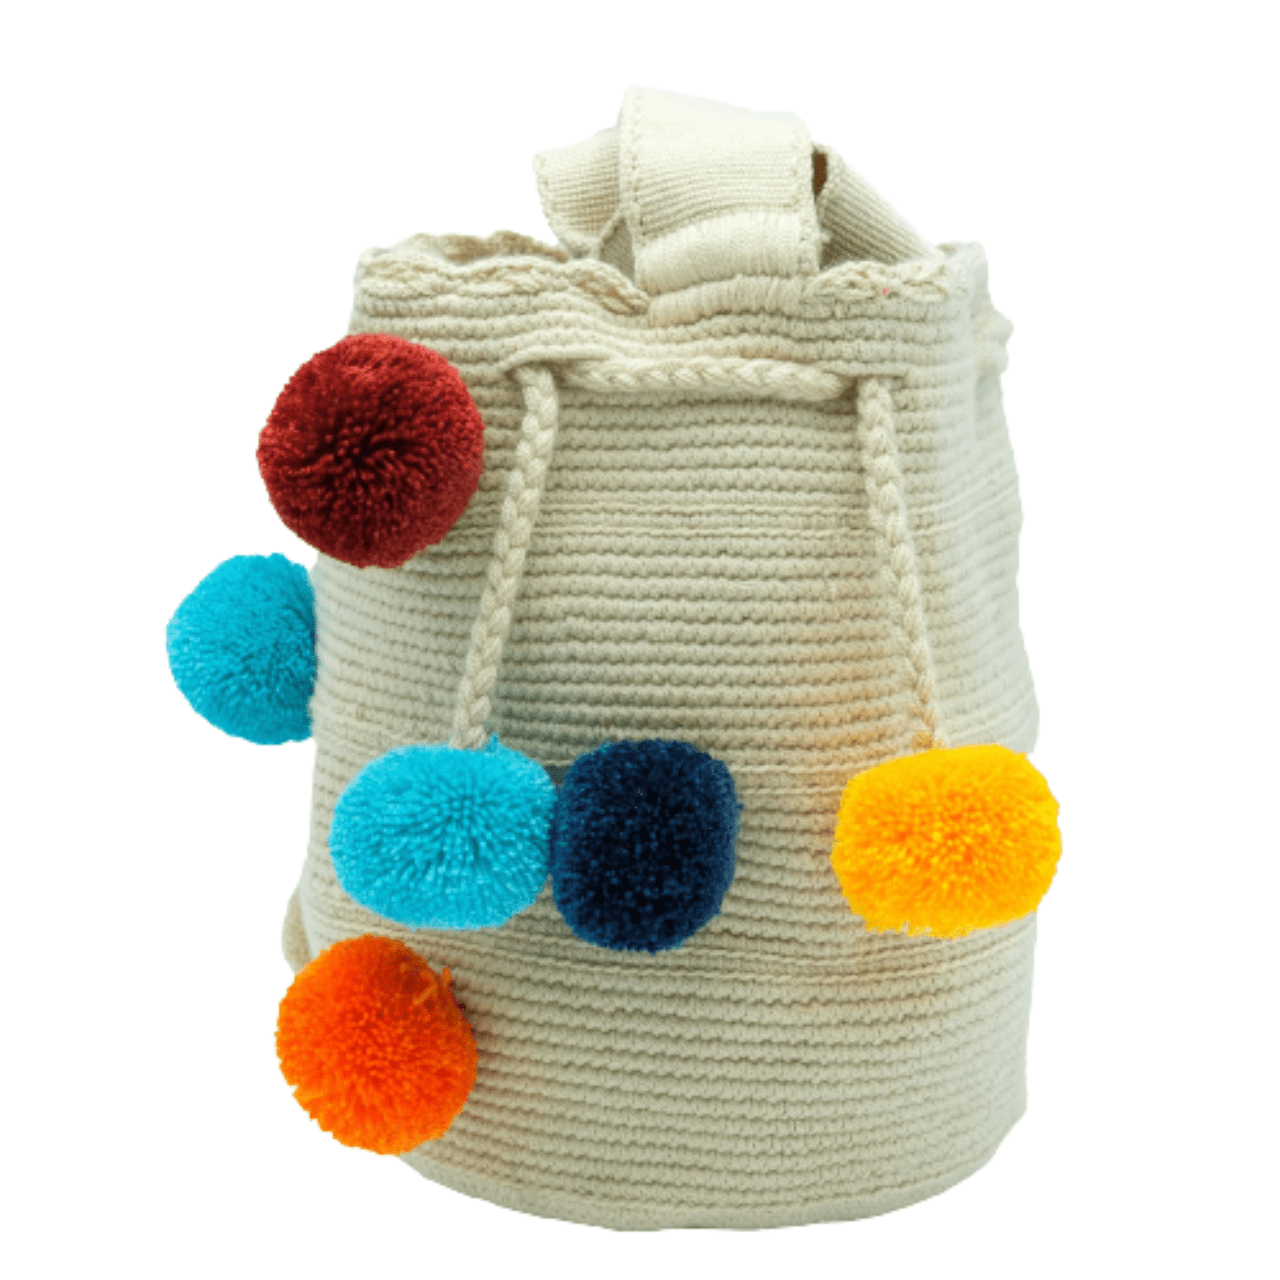 Koya crochet bag Medium in beige color with vibrant pom poms, a stylish and eye-catching accessory.